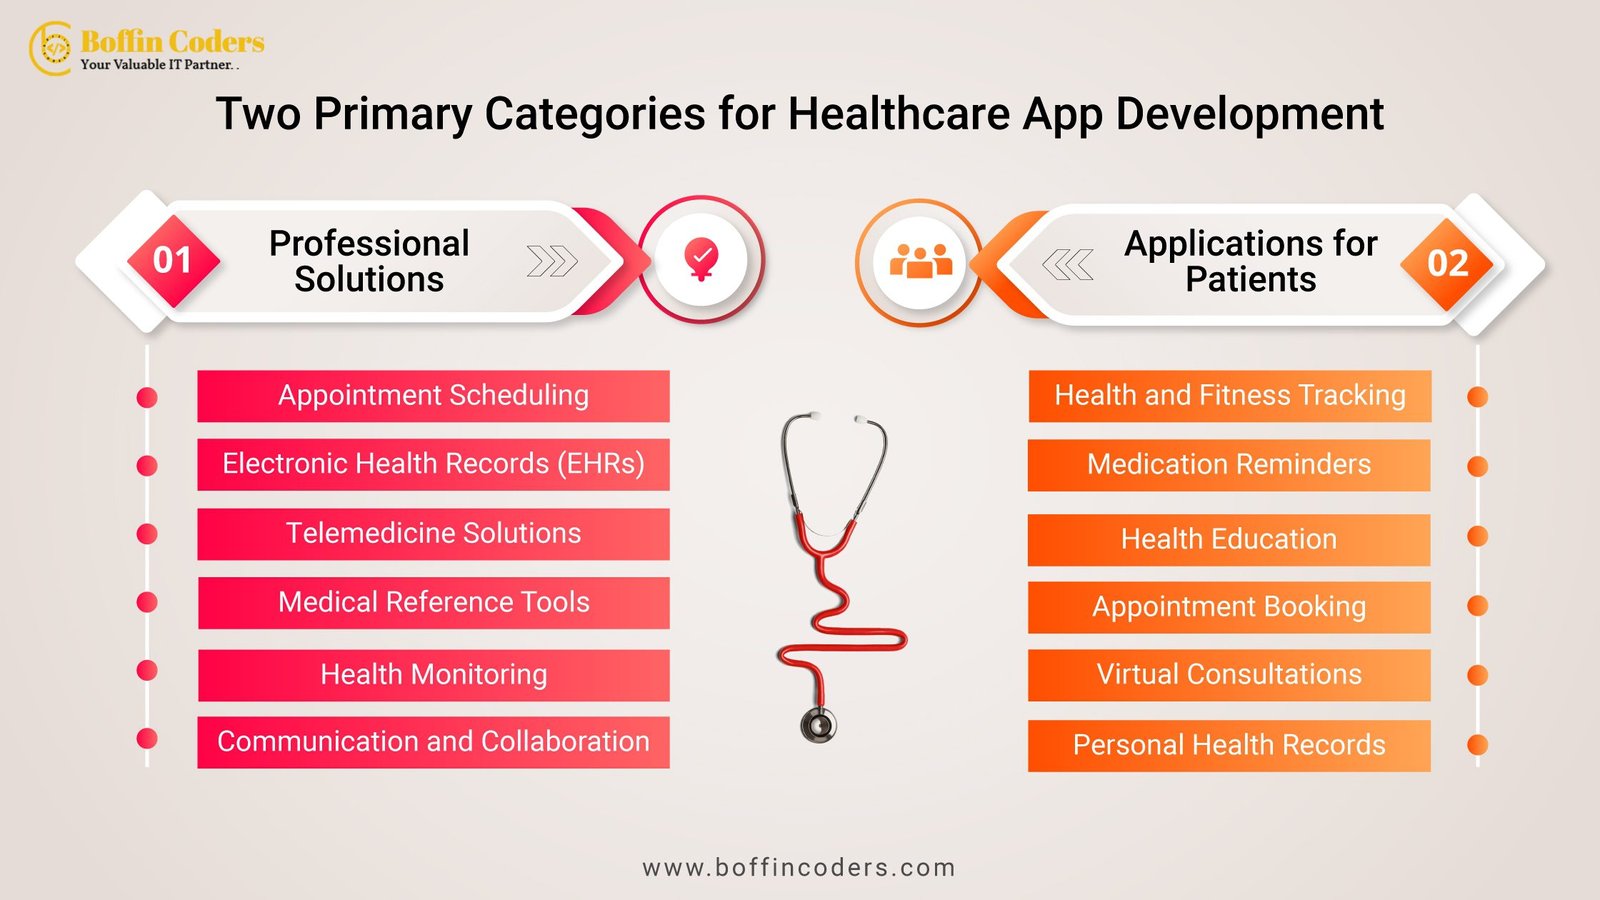 Two Primary Categories for Healthcare App Development